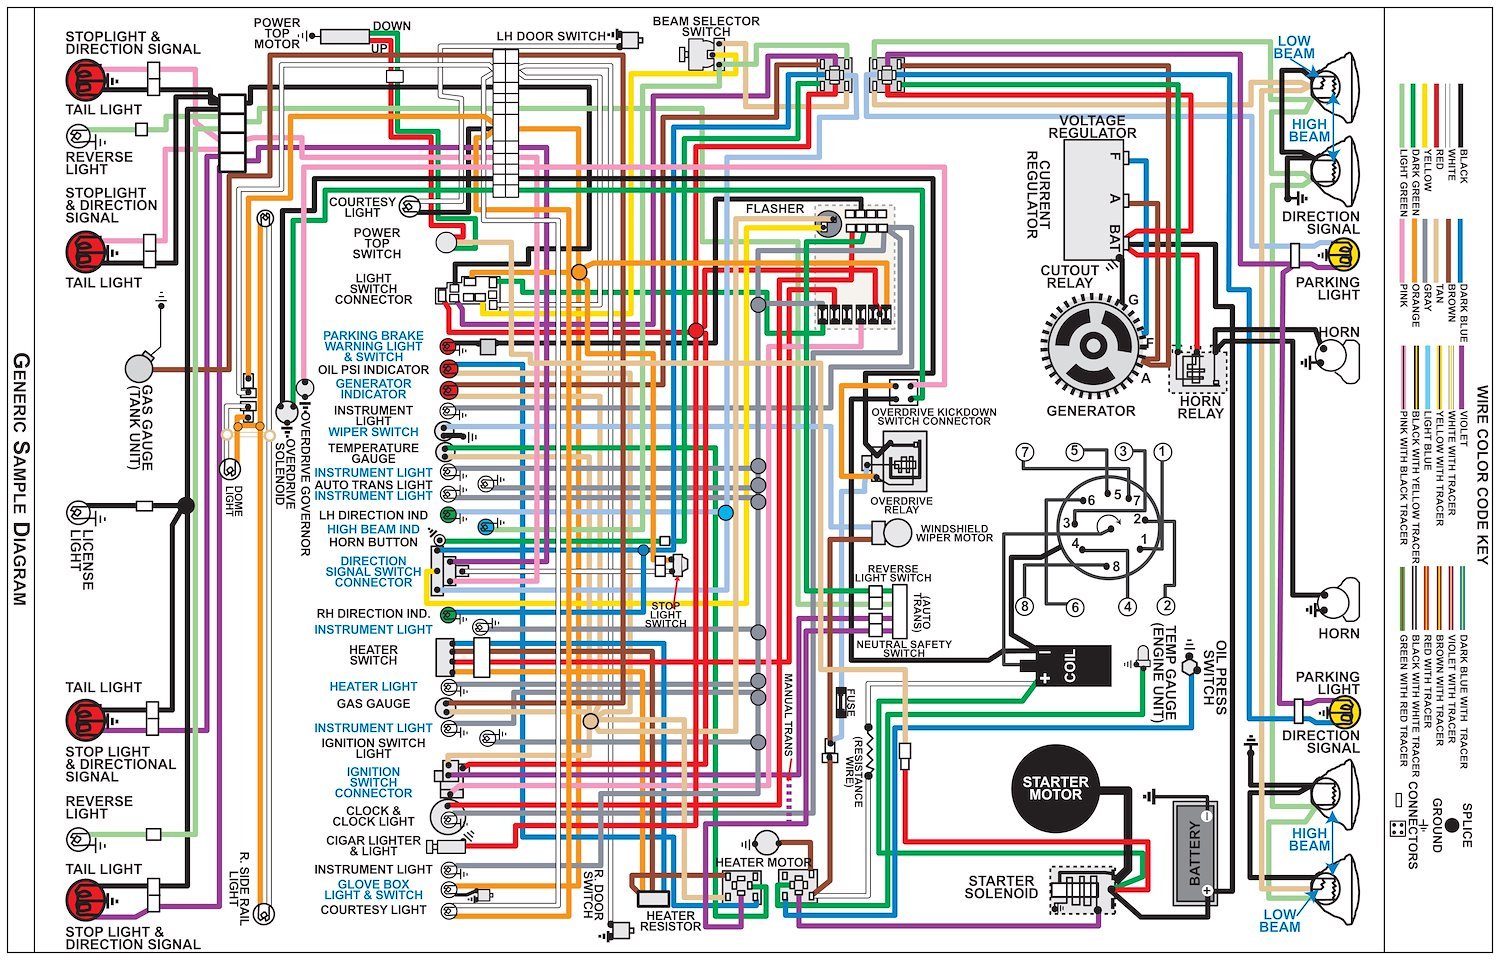 Wiring Diagram for 1962 Ford Galaxie, 11 in x 17 in., Laminated